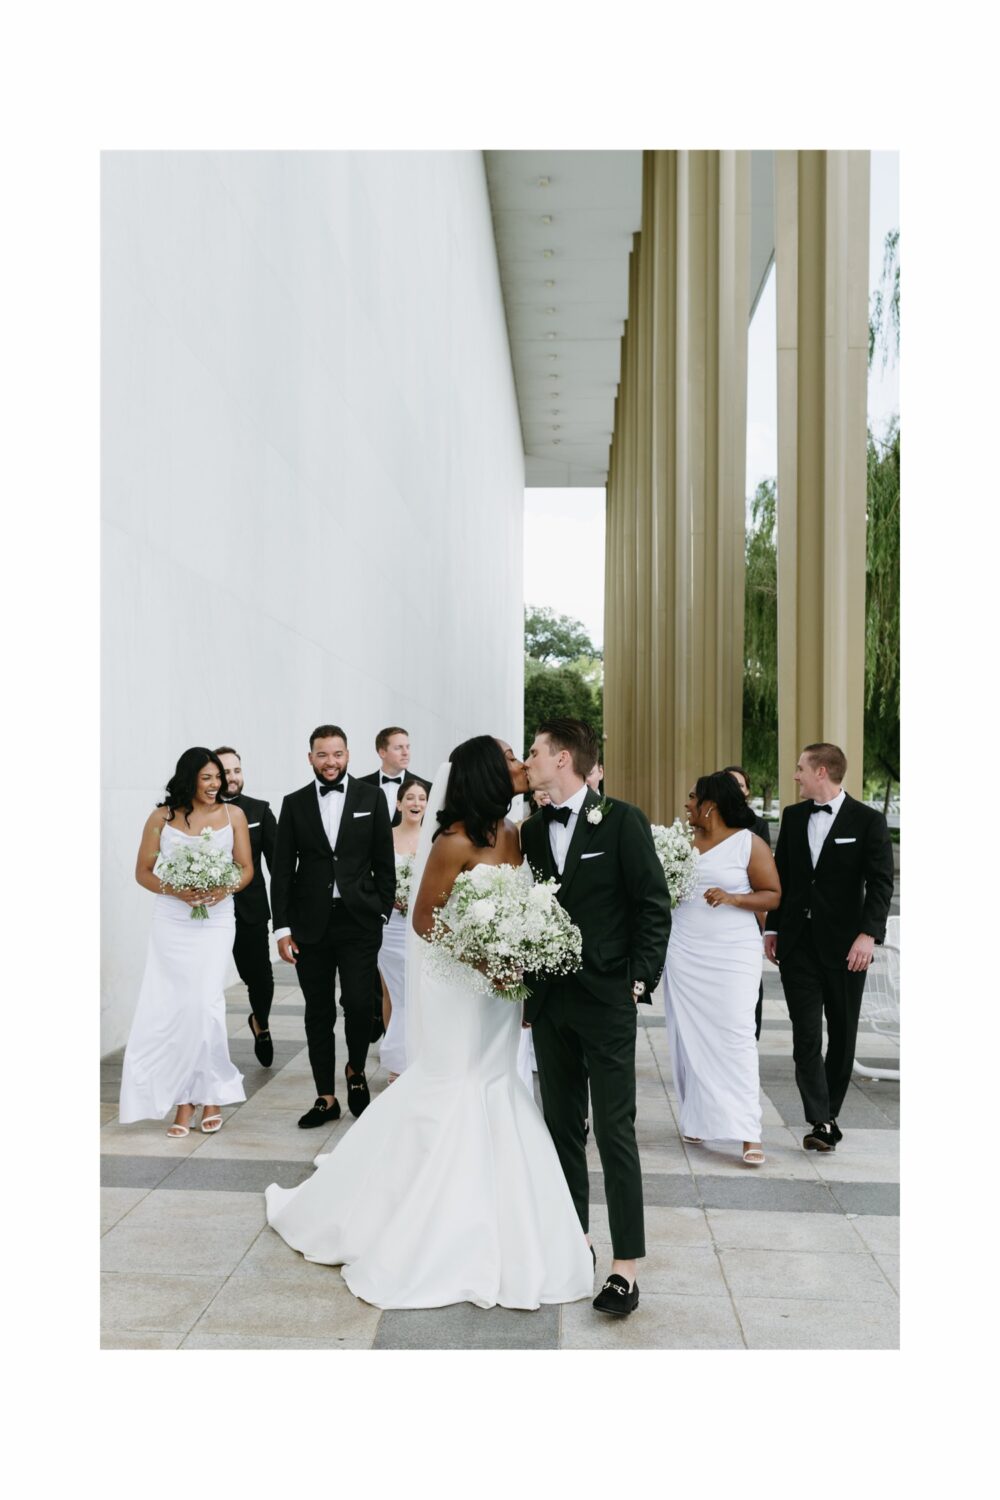 bride and groom kissing bridal party walking in background modern architecture 